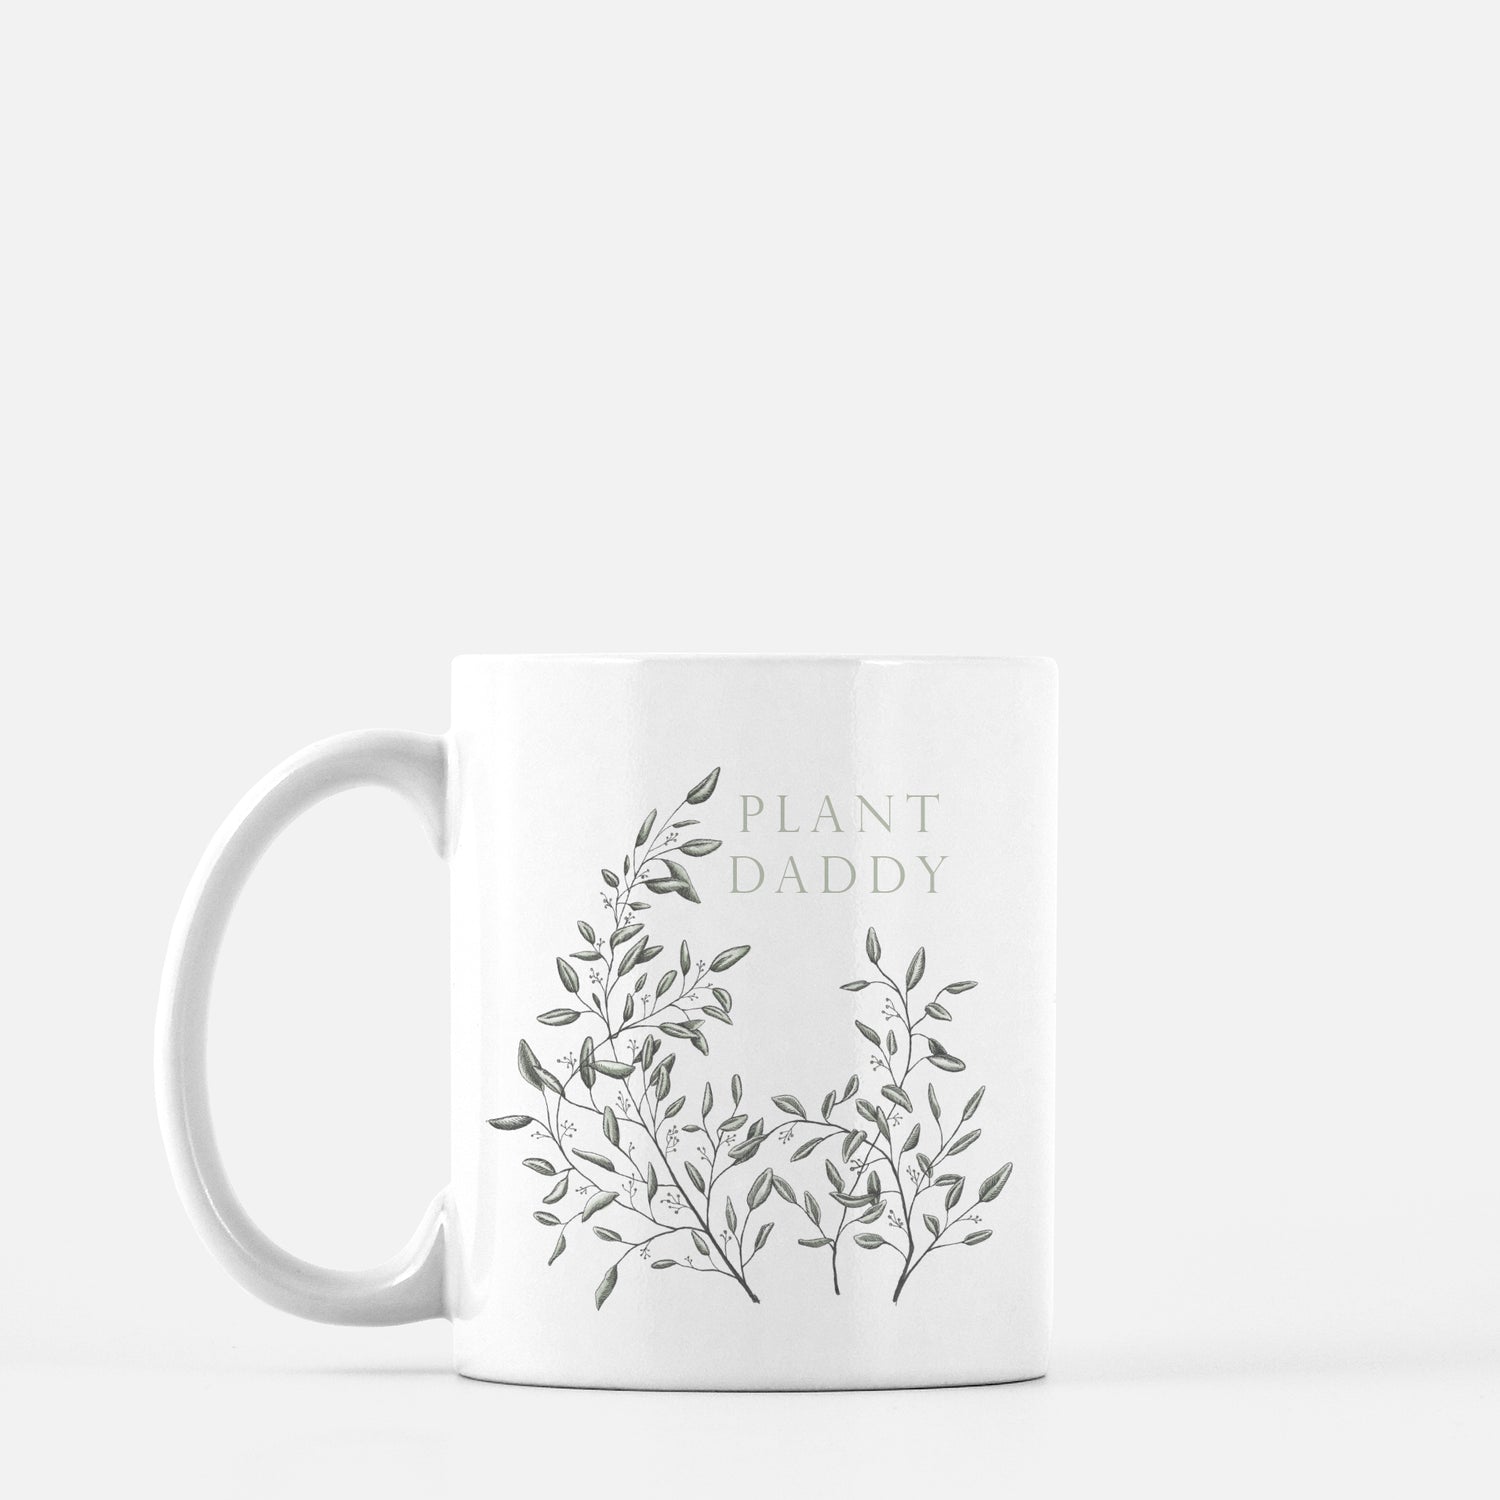 White ceramic mug with greenery that says "Plant daddy" by Rust Belt Love